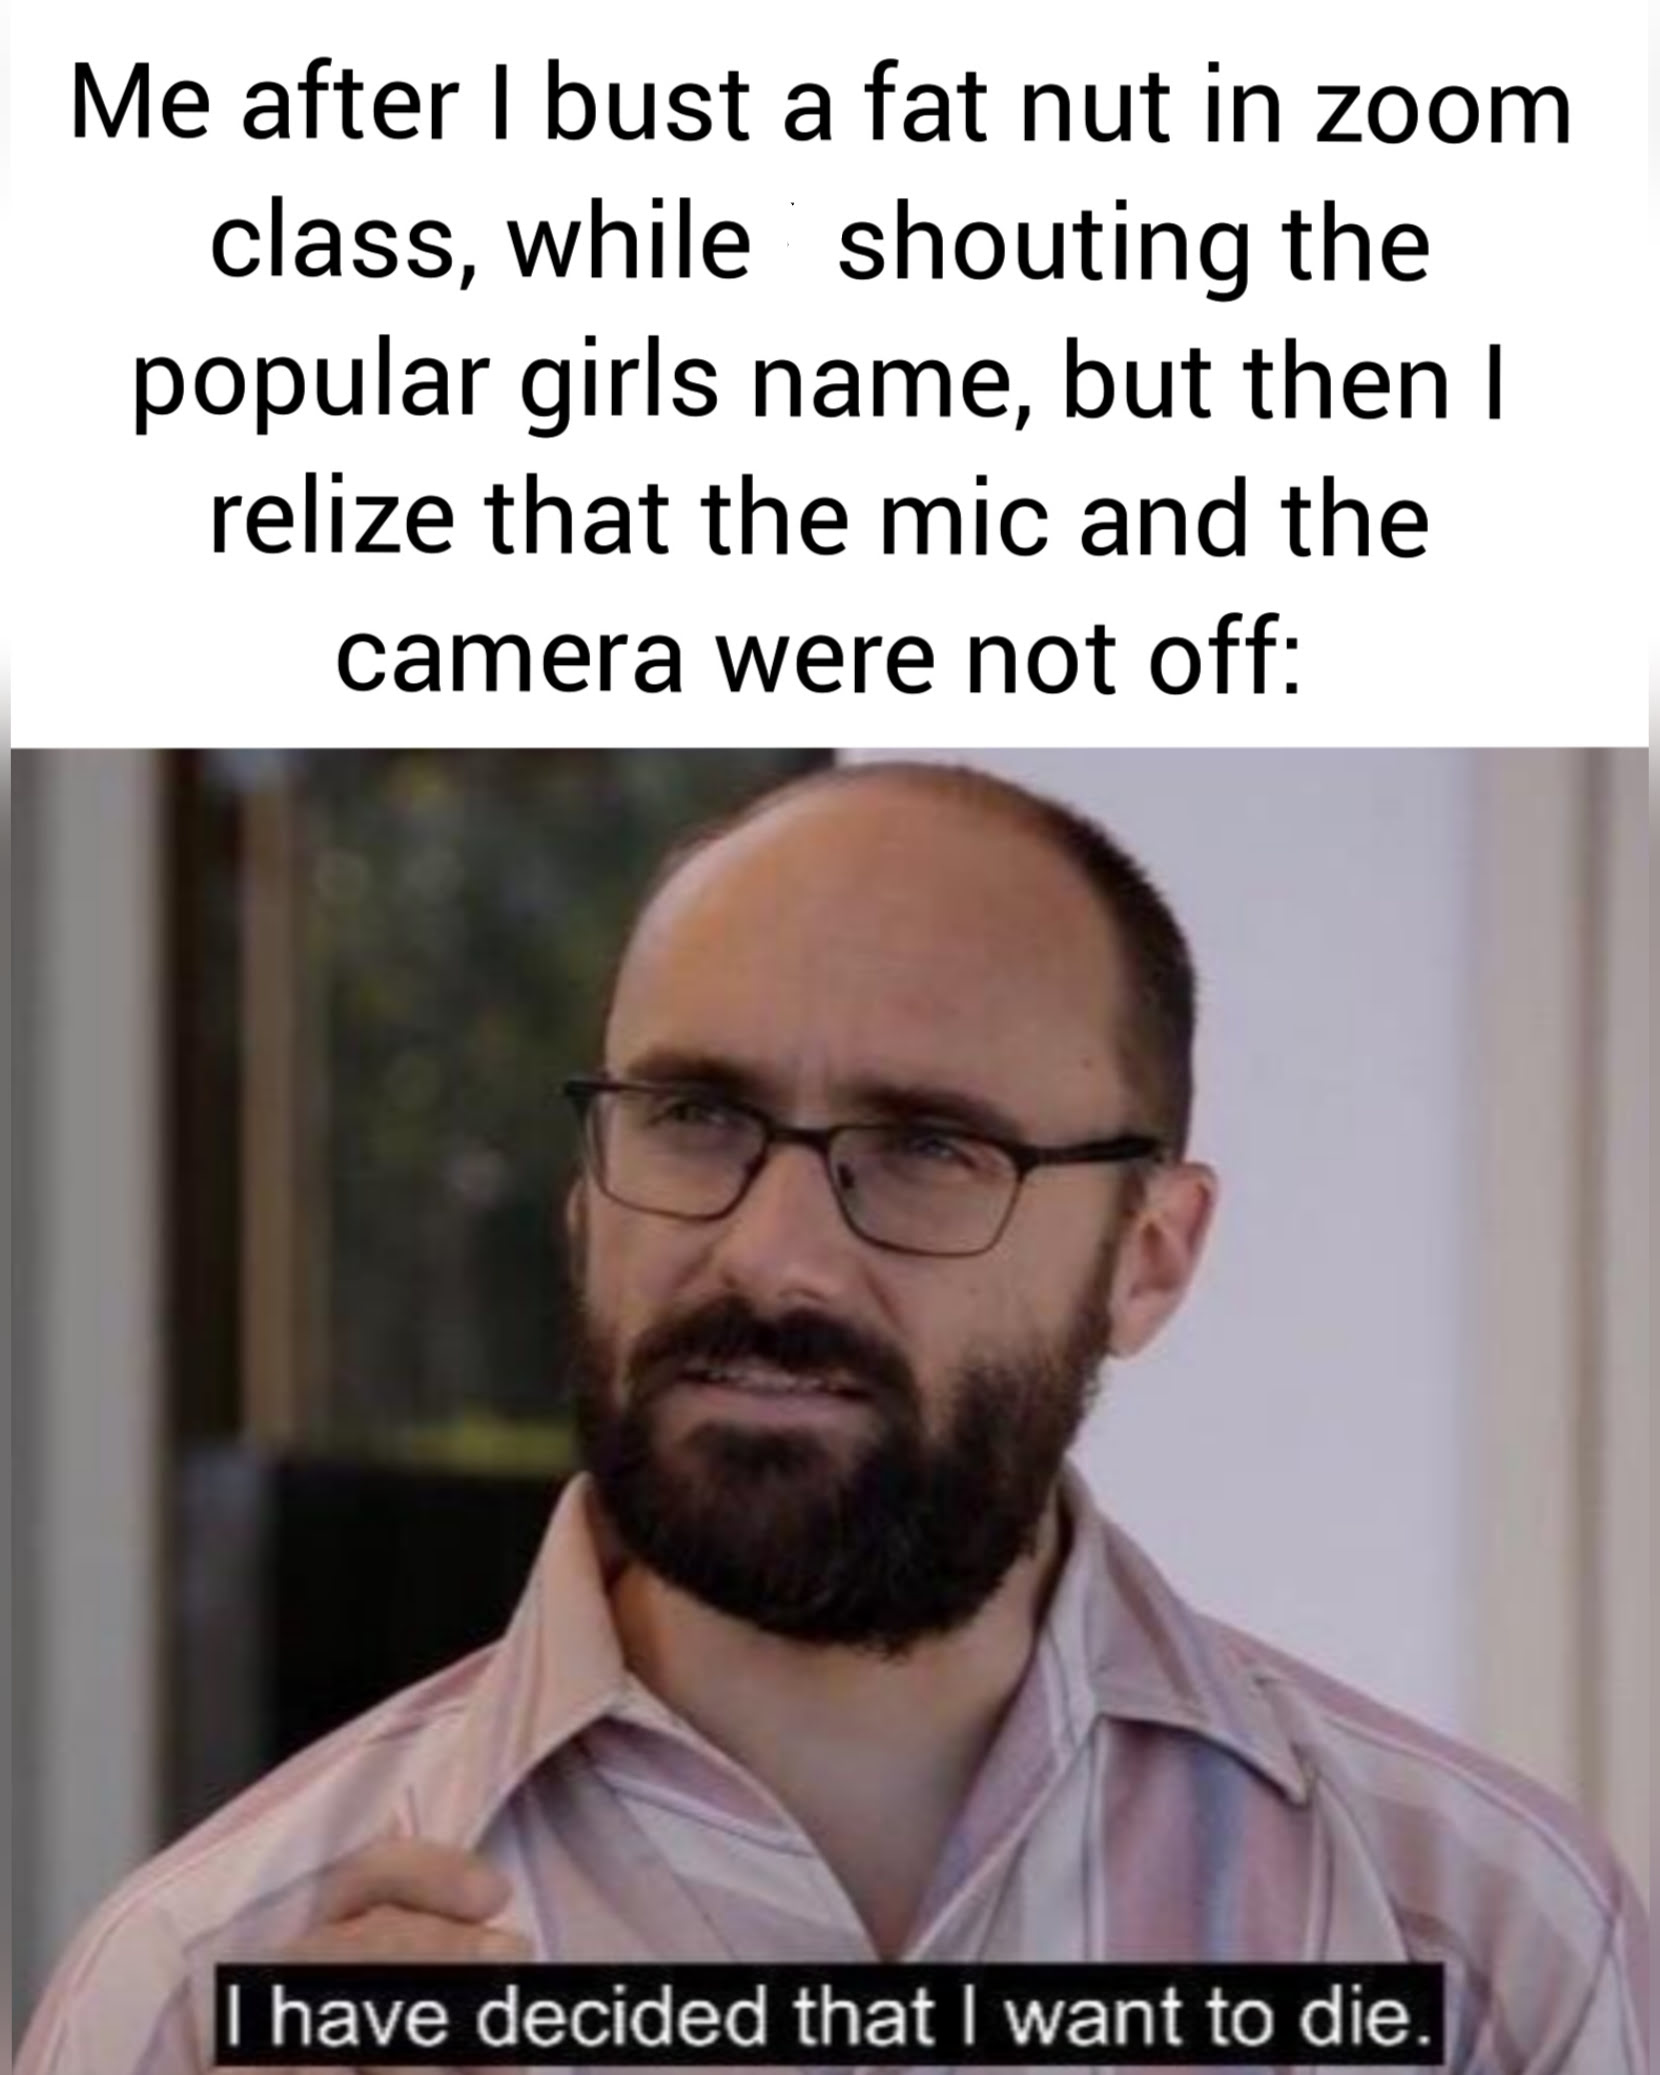 sex memes - technology hates me - Me after I bust a fat nut in zoom class, while shouting the popular girls name, but then I relize that the mic and the camera were not off I have decided that I want to die.